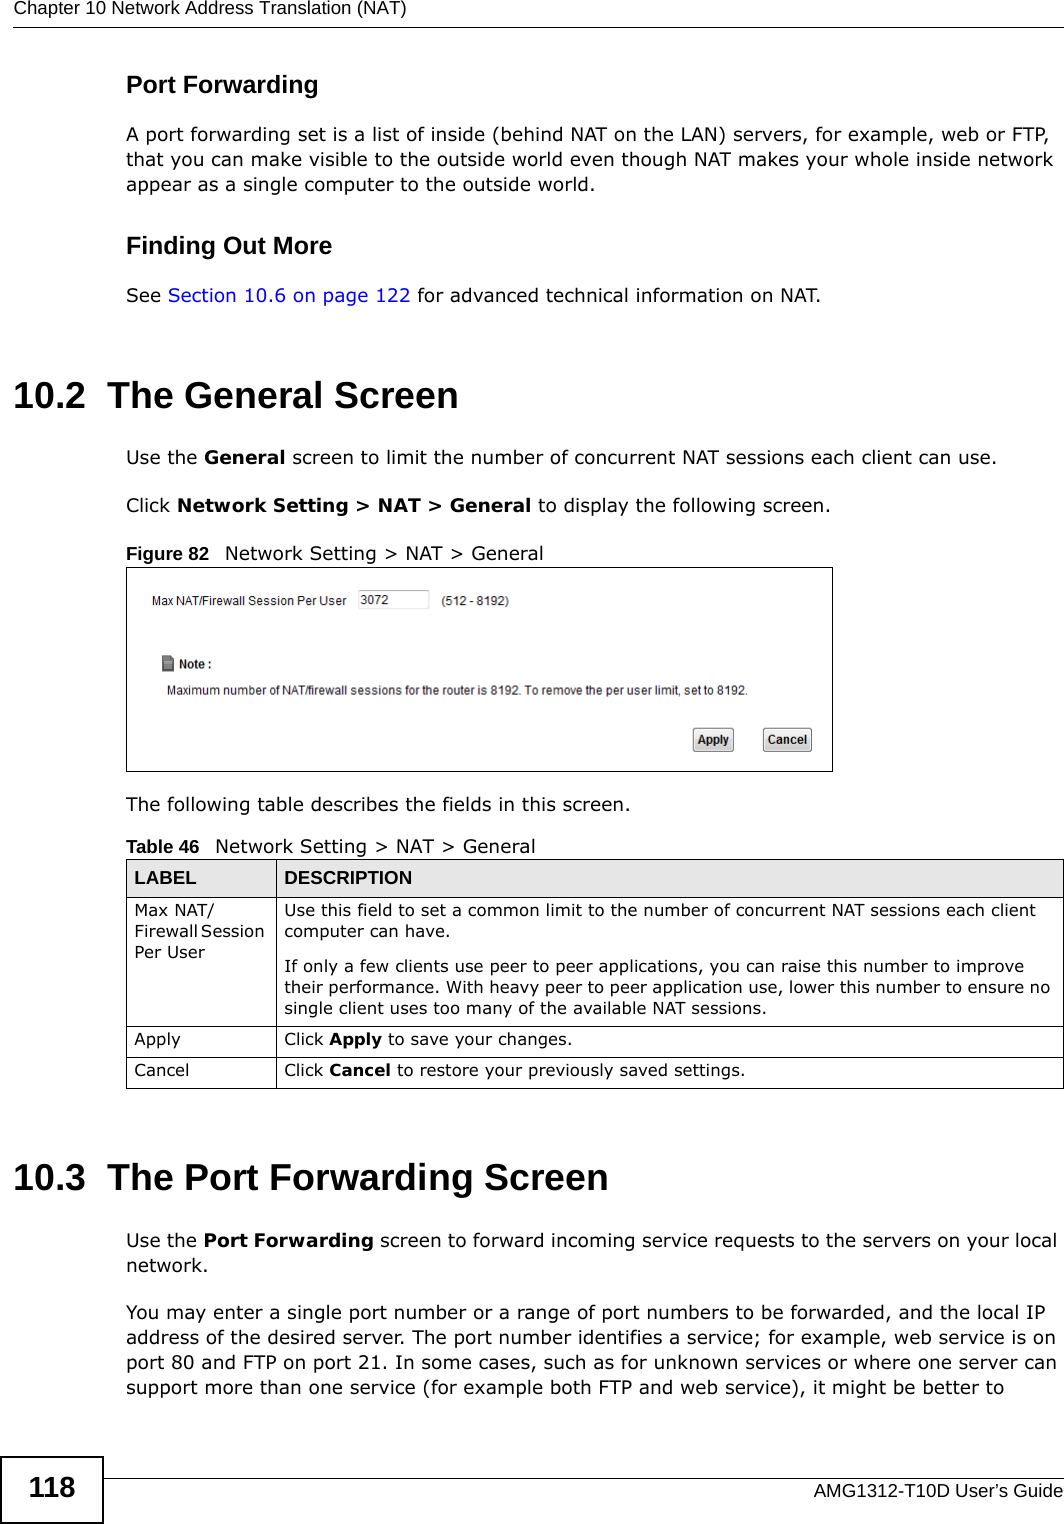 Chapter 10 Network Address Translation (NAT)AMG1312-T10D User’s Guide118Port ForwardingA port forwarding set is a list of inside (behind NAT on the LAN) servers, for example, web or FTP, that you can make visible to the outside world even though NAT makes your whole inside network appear as a single computer to the outside world.Finding Out MoreSee Section 10.6 on page 122 for advanced technical information on NAT.10.2  The General ScreenUse the General screen to limit the number of concurrent NAT sessions each client can use. Click Network Setting &gt; NAT &gt; General to display the following screen. Figure 82   Network Setting &gt; NAT &gt; GeneralThe following table describes the fields in this screen.10.3  The Port Forwarding Screen Use the Port Forwarding screen to forward incoming service requests to the servers on your local network.You may enter a single port number or a range of port numbers to be forwarded, and the local IP address of the desired server. The port number identifies a service; for example, web service is on port 80 and FTP on port 21. In some cases, such as for unknown services or where one server can support more than one service (for example both FTP and web service), it might be better to Table 46   Network Setting &gt; NAT &gt; GeneralLABEL DESCRIPTIONMax NAT/Firewall Session Per User  Use this field to set a common limit to the number of concurrent NAT sessions each client computer can have.If only a few clients use peer to peer applications, you can raise this number to improve their performance. With heavy peer to peer application use, lower this number to ensure no single client uses too many of the available NAT sessions.Apply Click Apply to save your changes.Cancel Click Cancel to restore your previously saved settings.